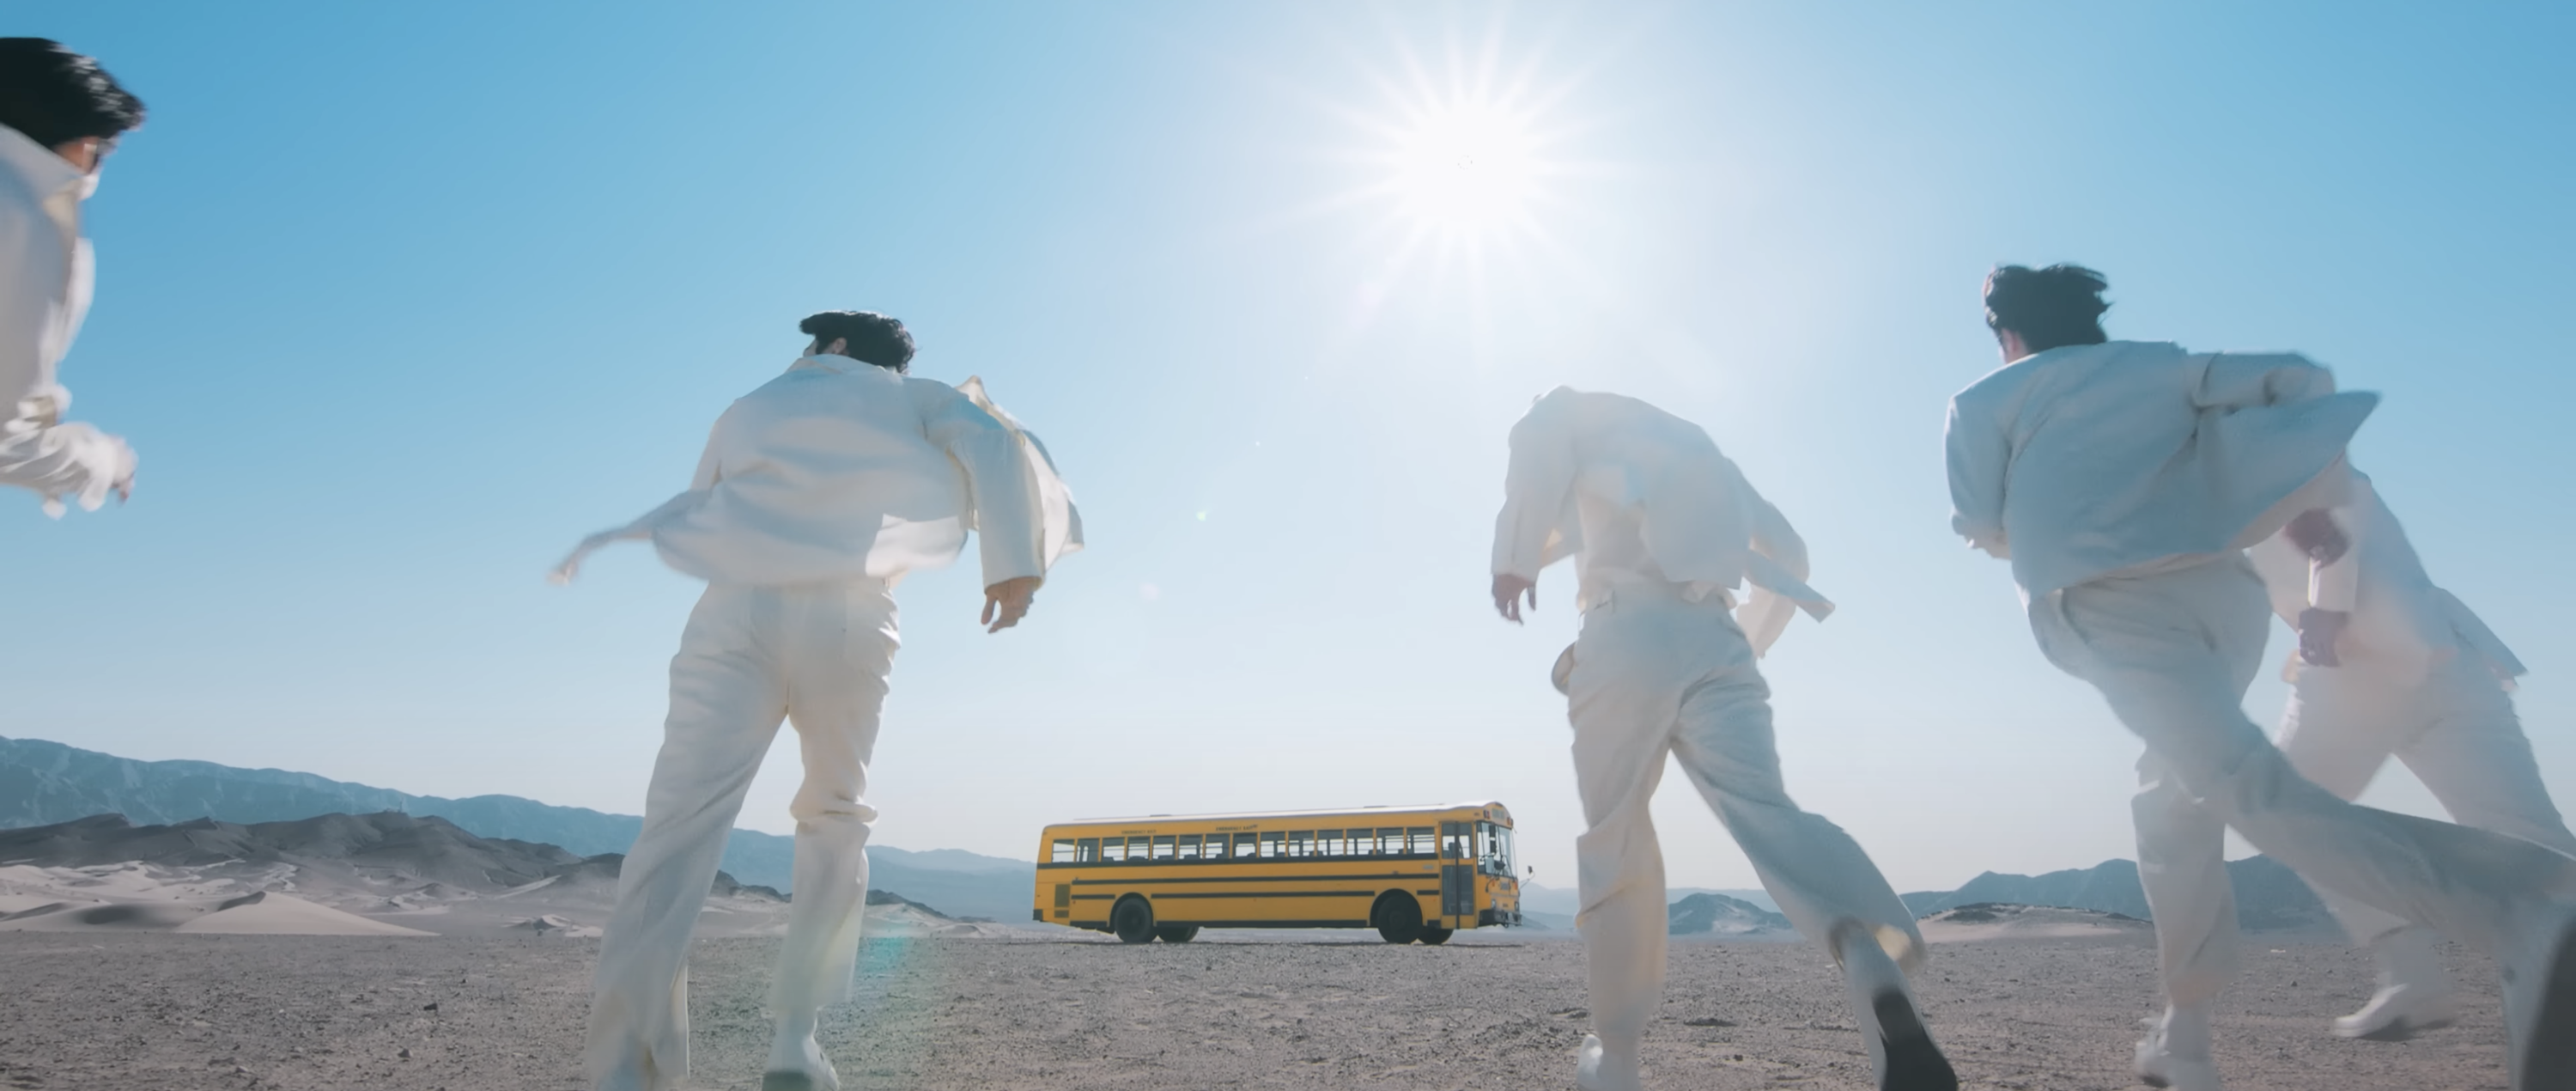 A still from a music video shows members of BTS dressed in white in a desert by a school bus in the distance